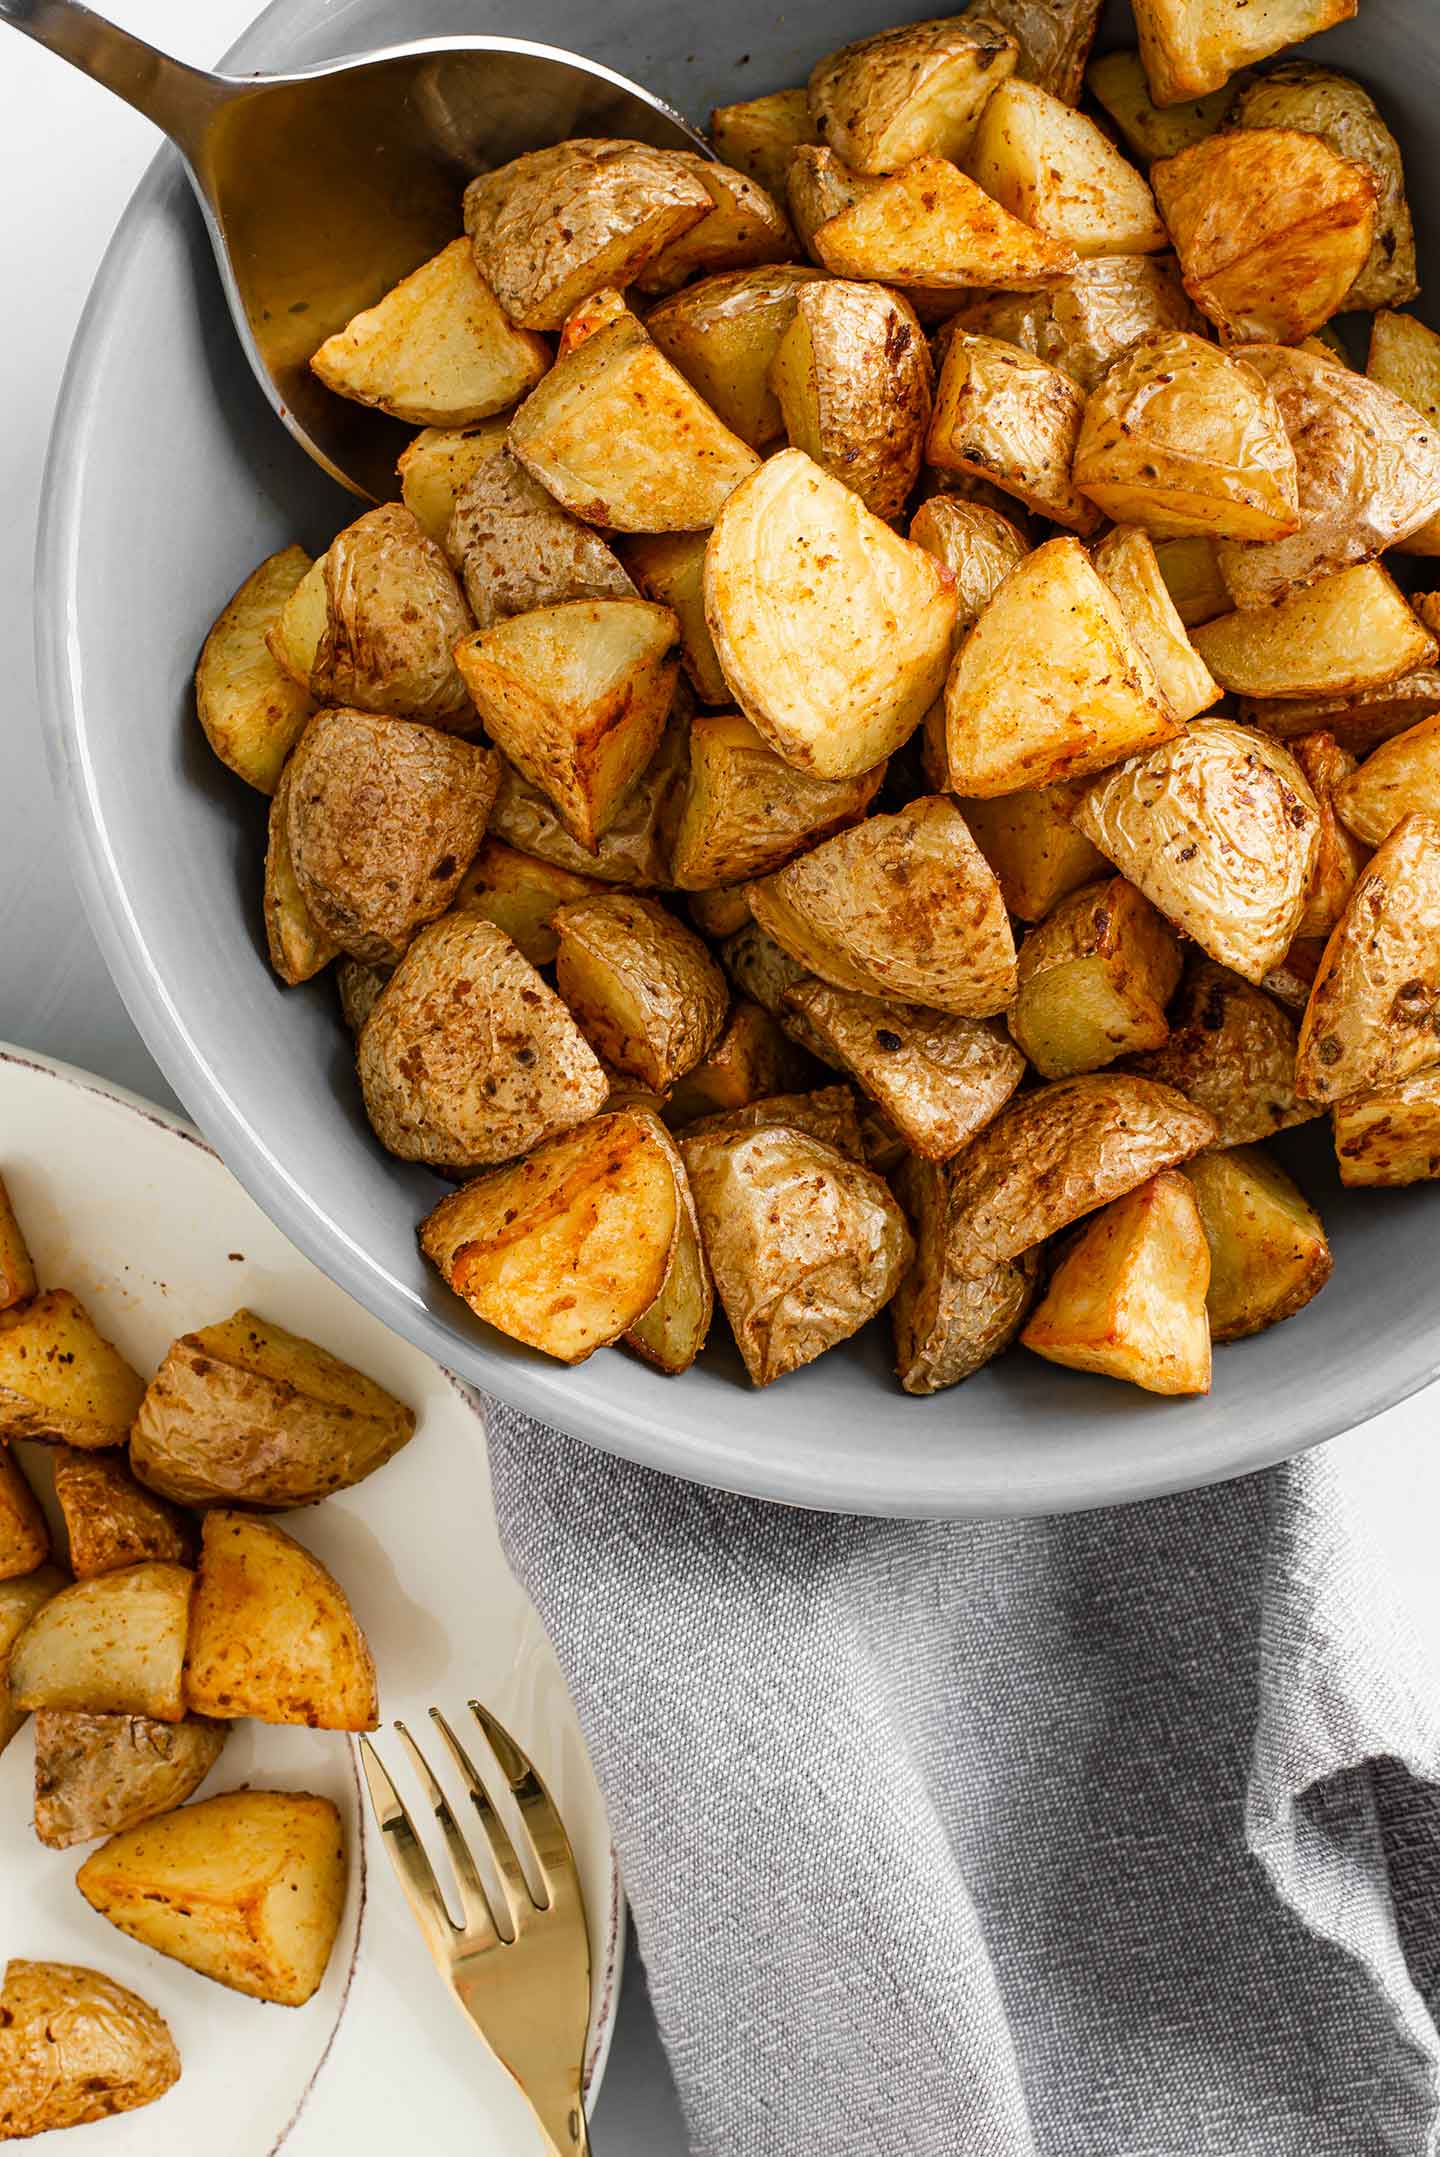 Top down view of crispy roasted potatoes in a bowl with a serving spoon. Just visible in the corner of the image is a plate with potatoes and a gold fork.